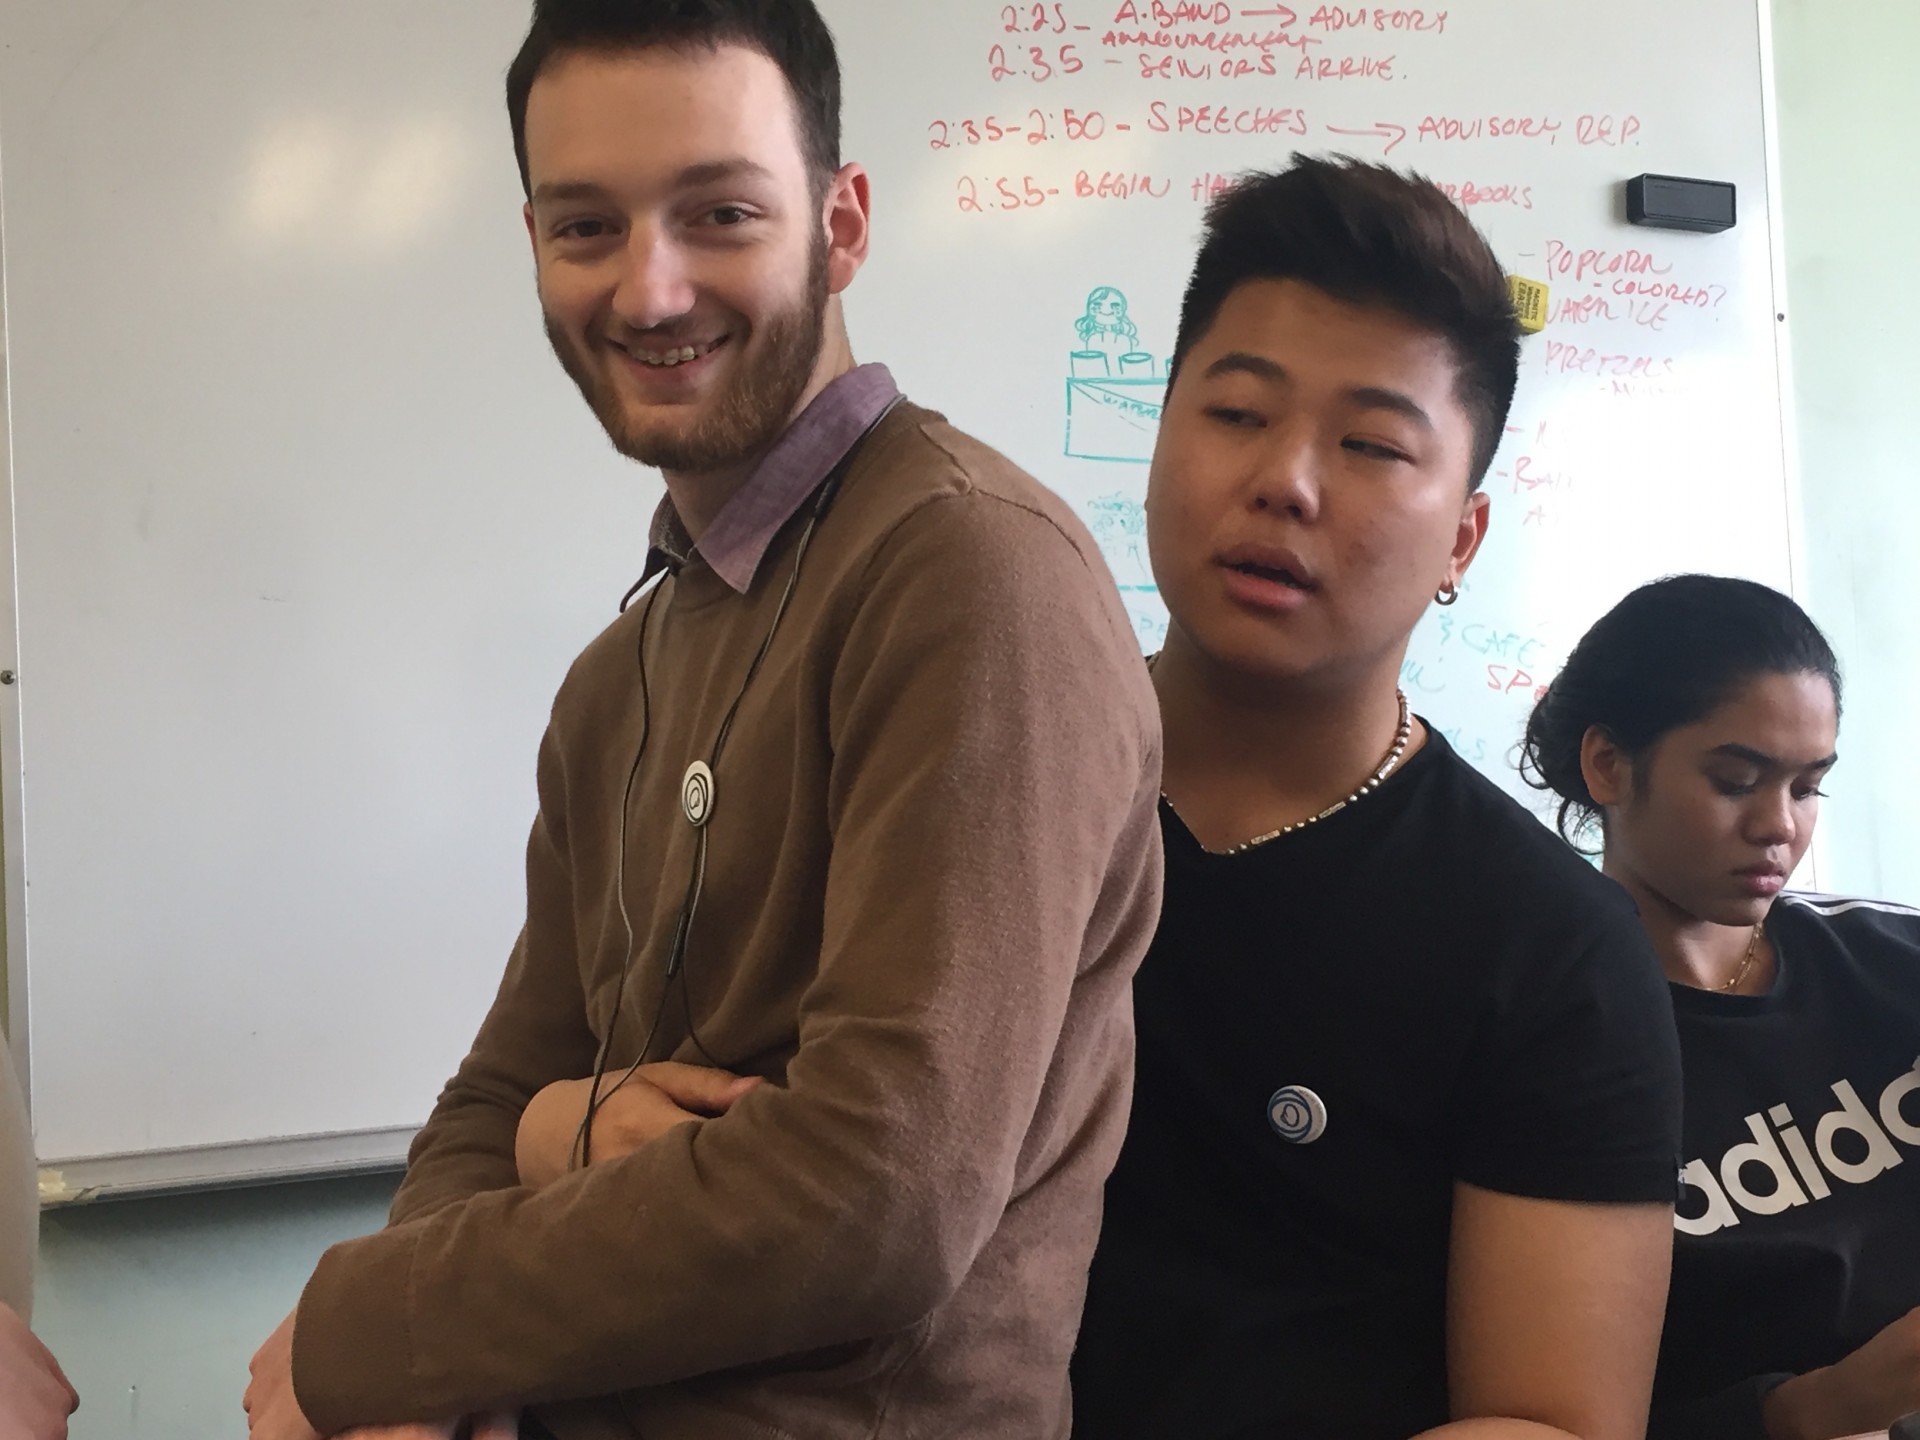 The boys repping their pins during class